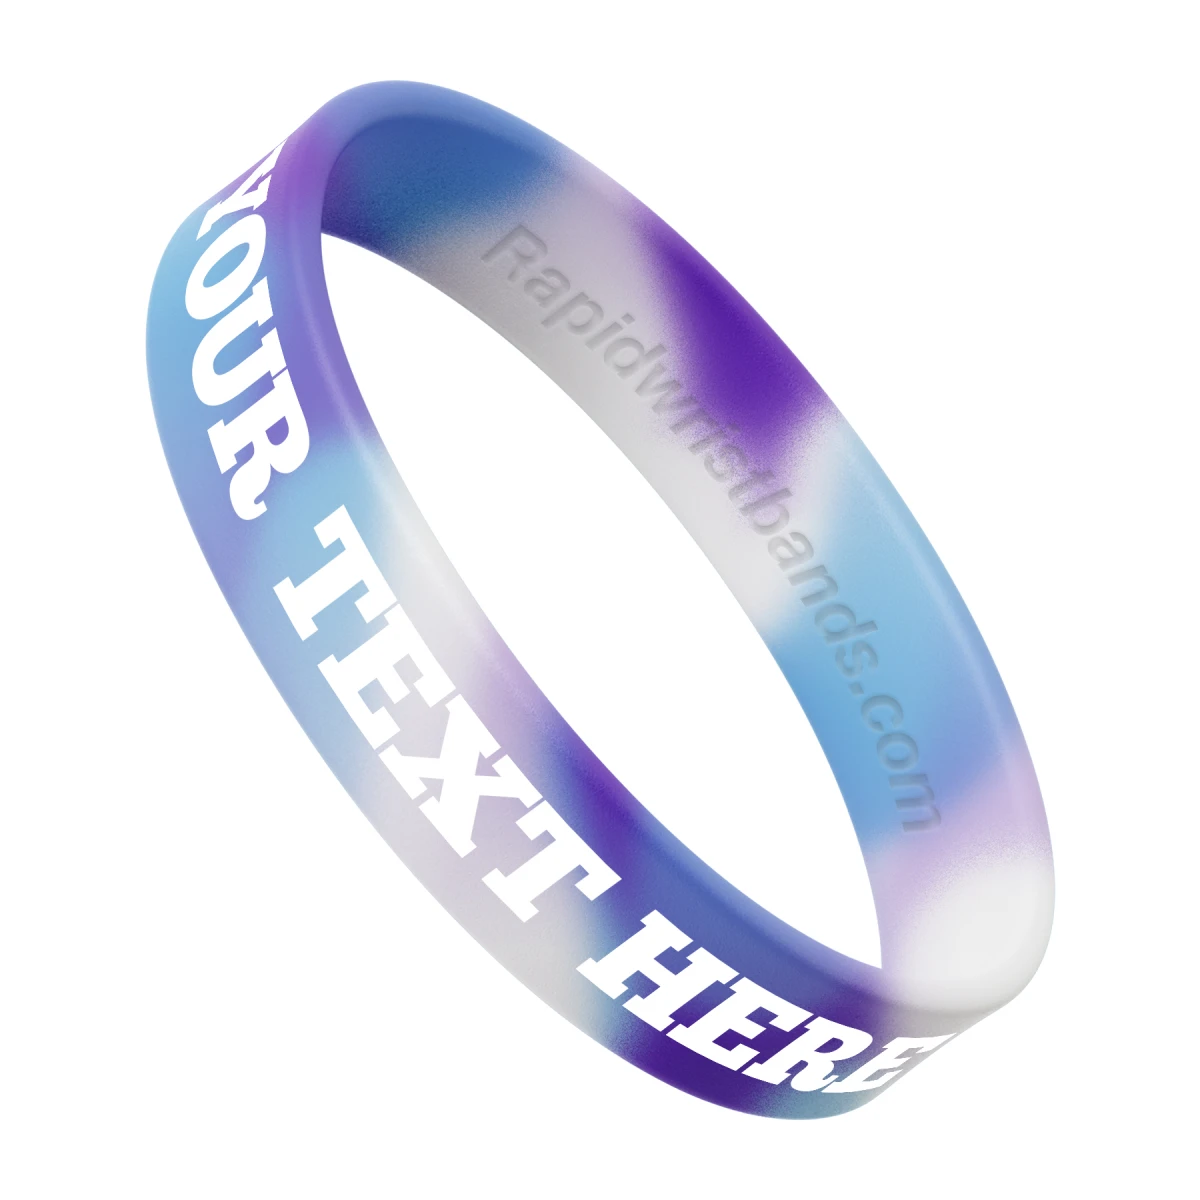 Swirl Light Blue/White/Violet Wristband With Your Text Here Printed In White